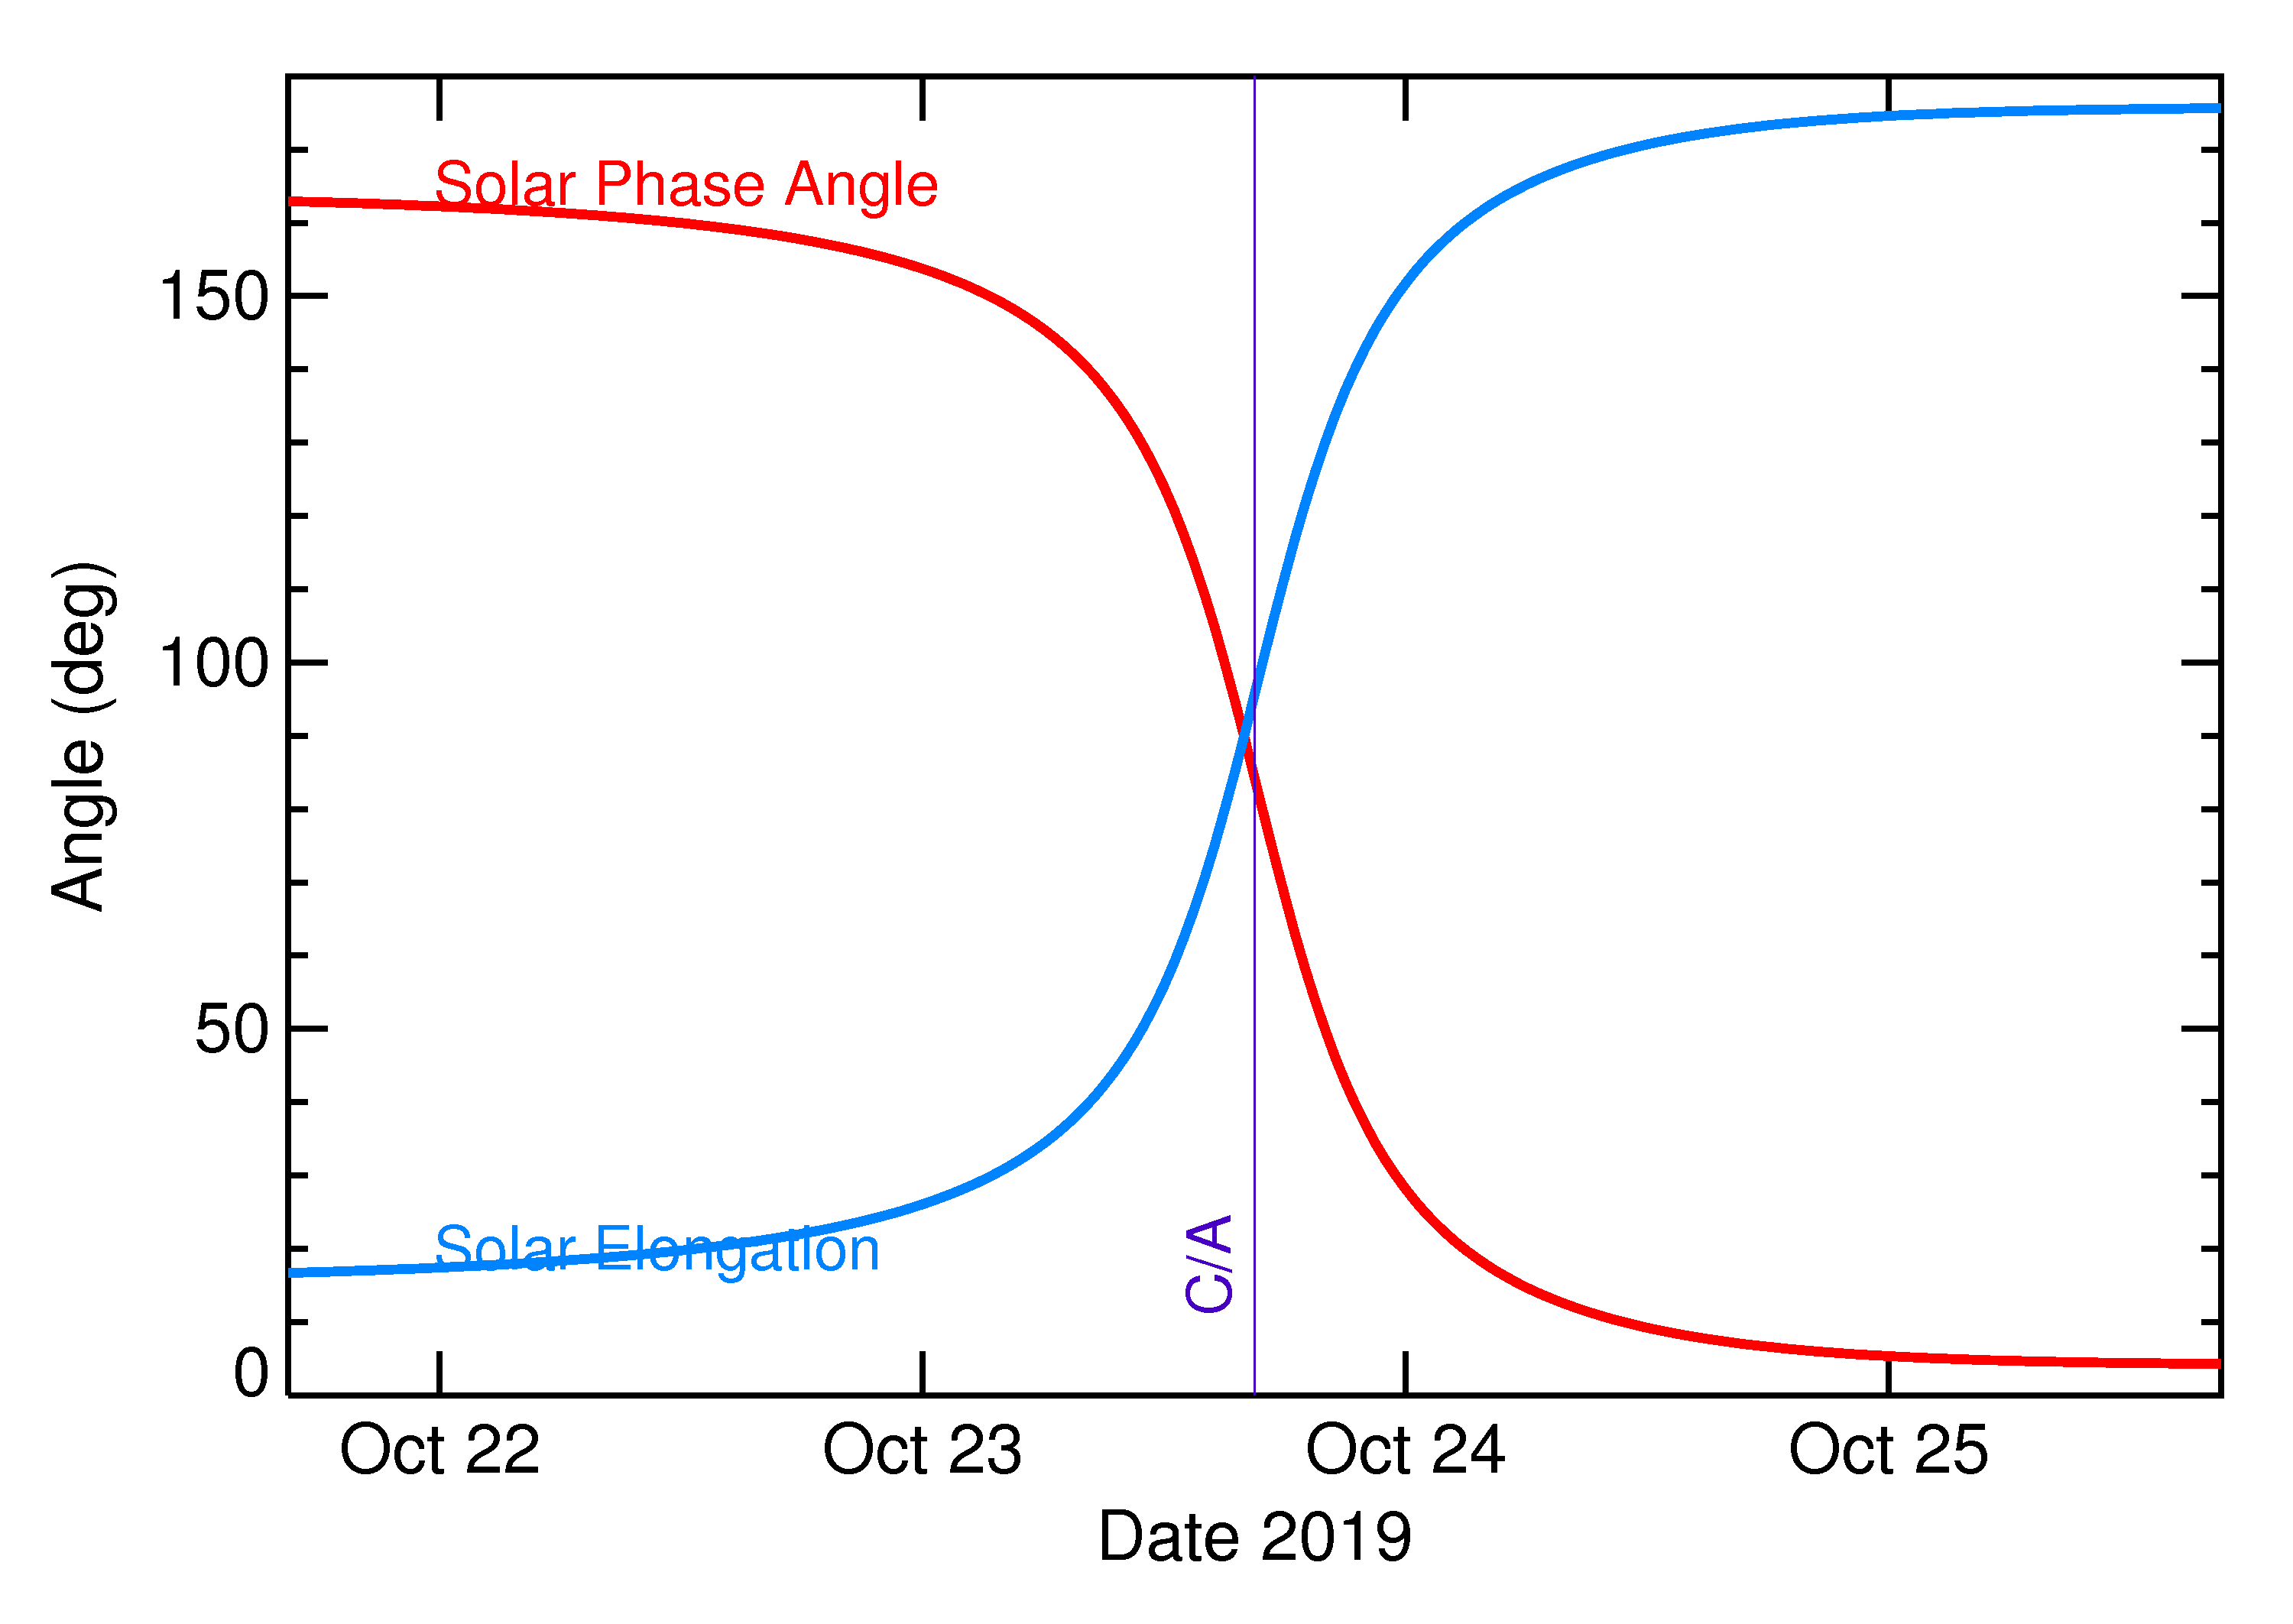 Solar Elongation and Solar Phase Angle of 2019 UN8 in the days around closest approach